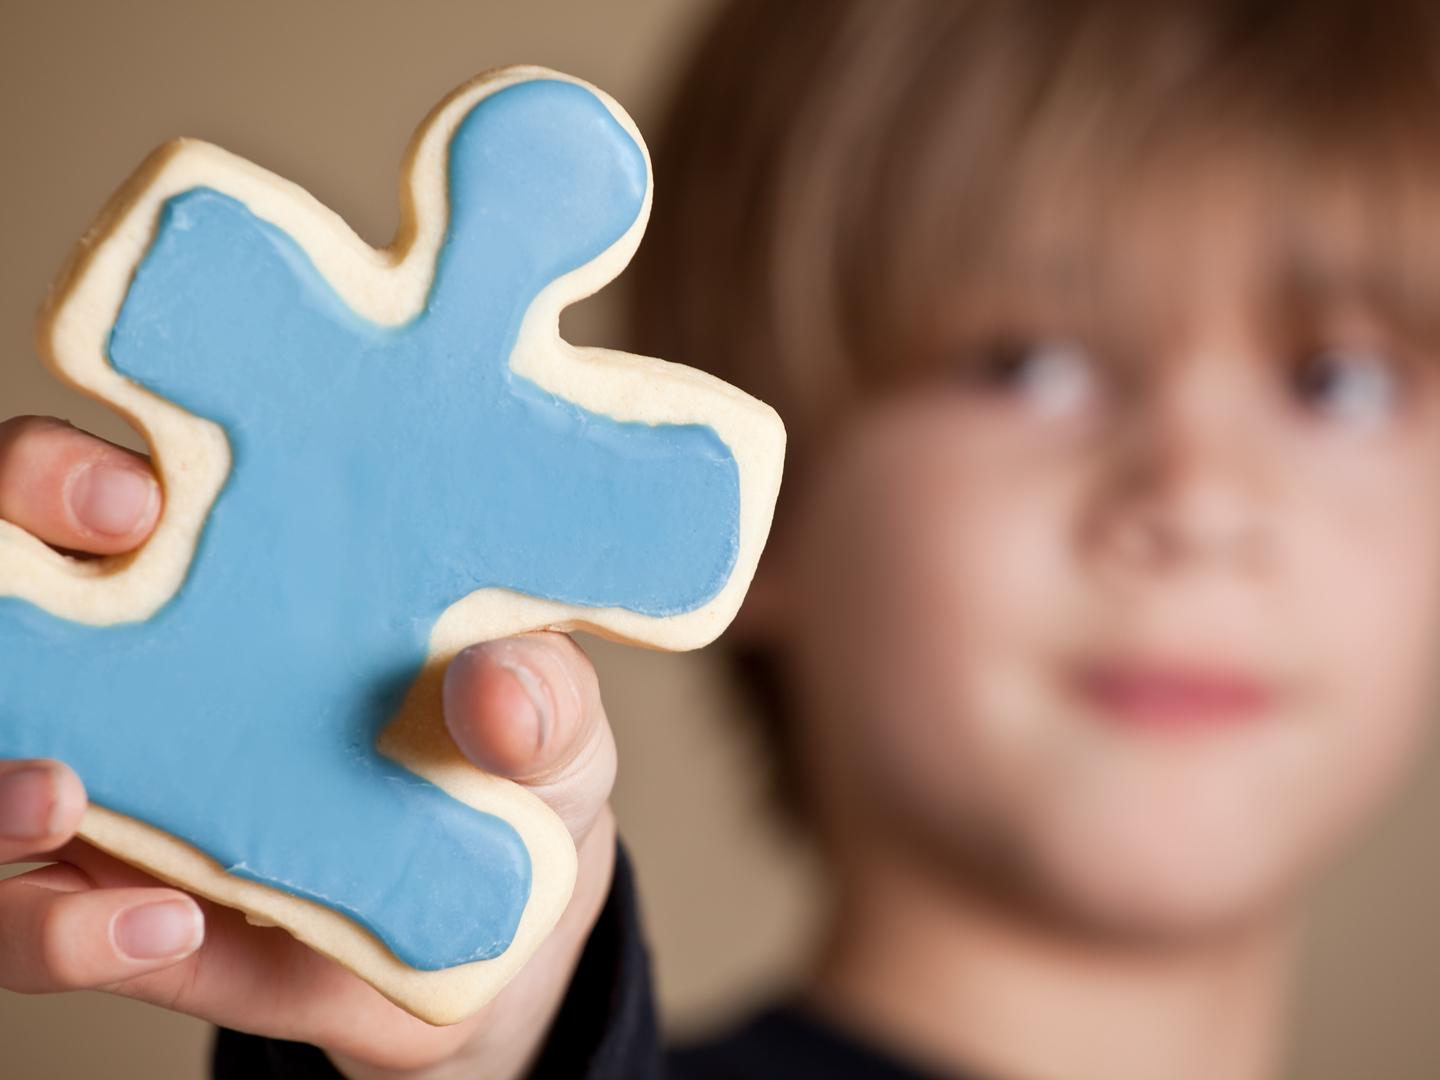 &quot;A 9 year old boy holding out a blue iced puzzle piece shaped sugar cookie.  Shallow DOF, focus on cookie only.April is Autism Awareness month. Colorful puzzle pieces are often used to represent Autism awareness.  1 in 88 children in the USA are diagnosed with an ASD (Autism Spectrum Disorder).&quot;